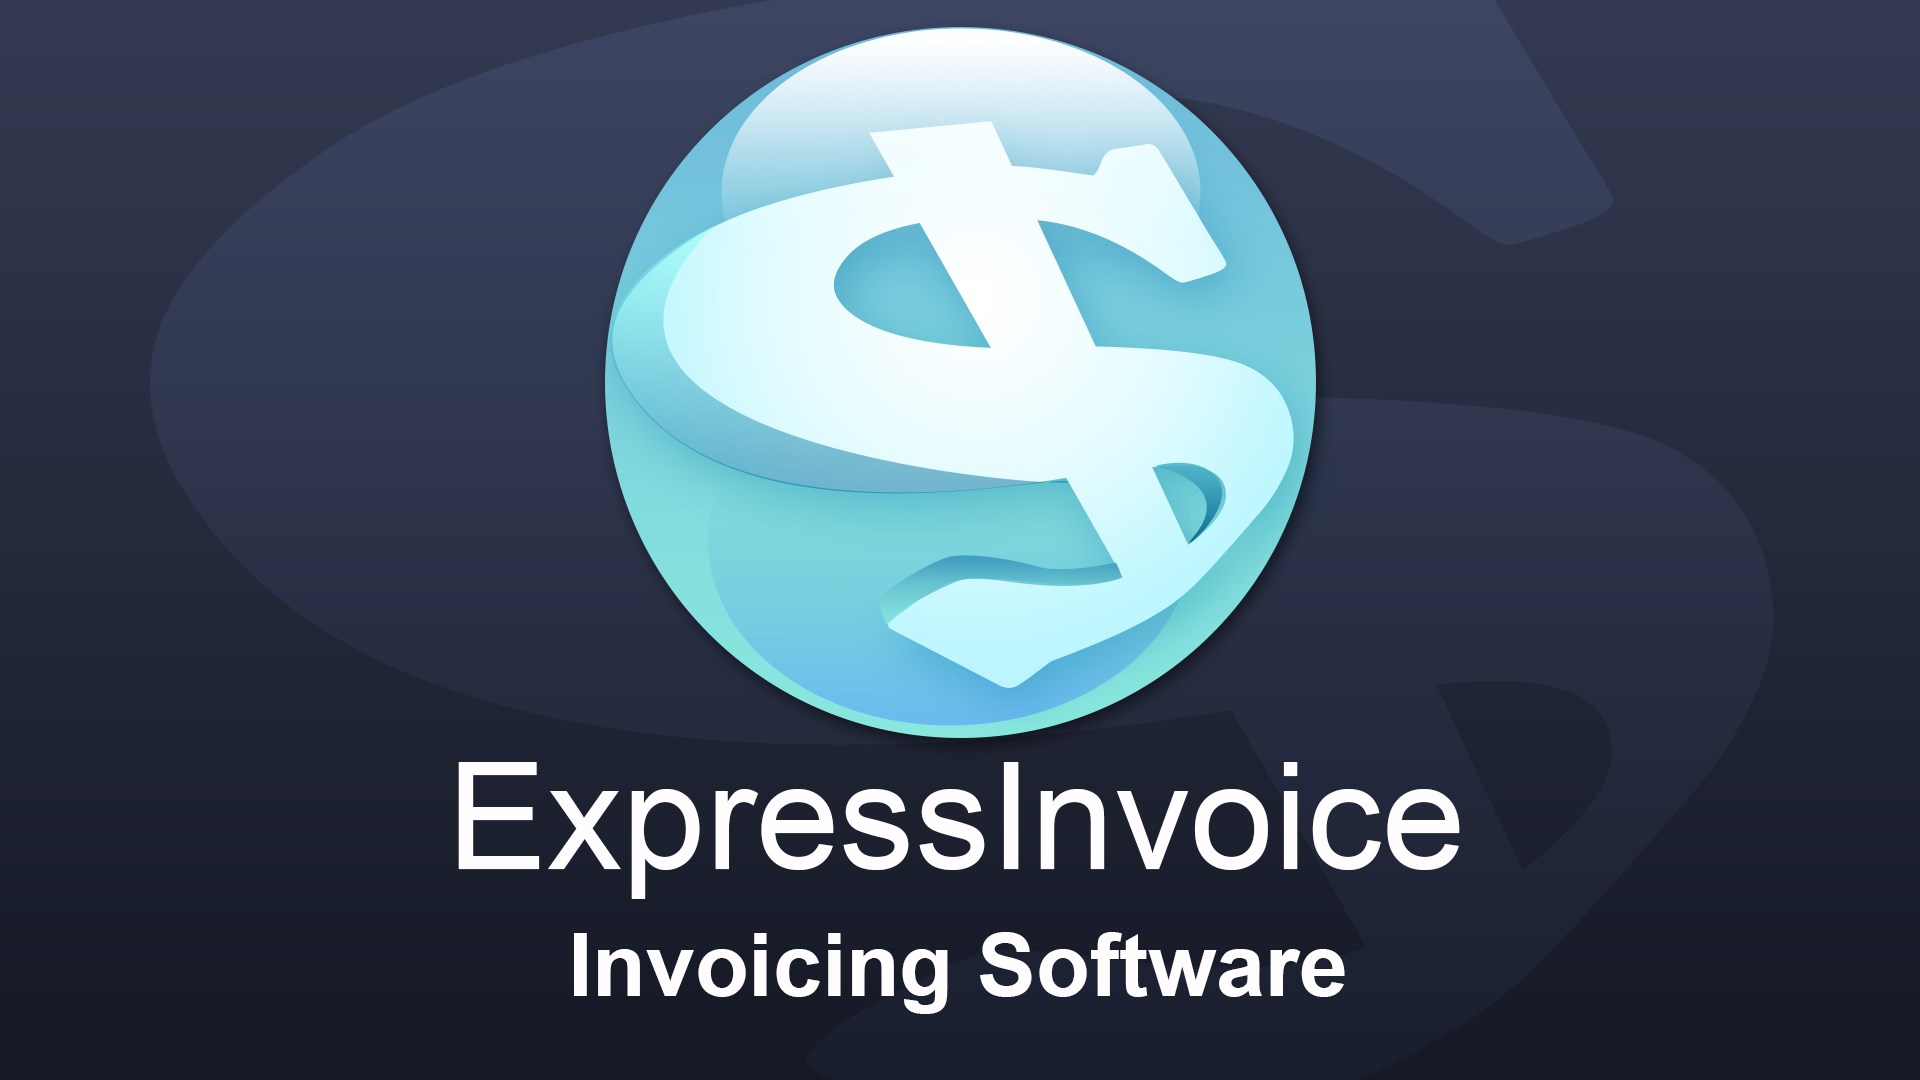 NCH: Express Invoice Invoicing Key (203.62$)